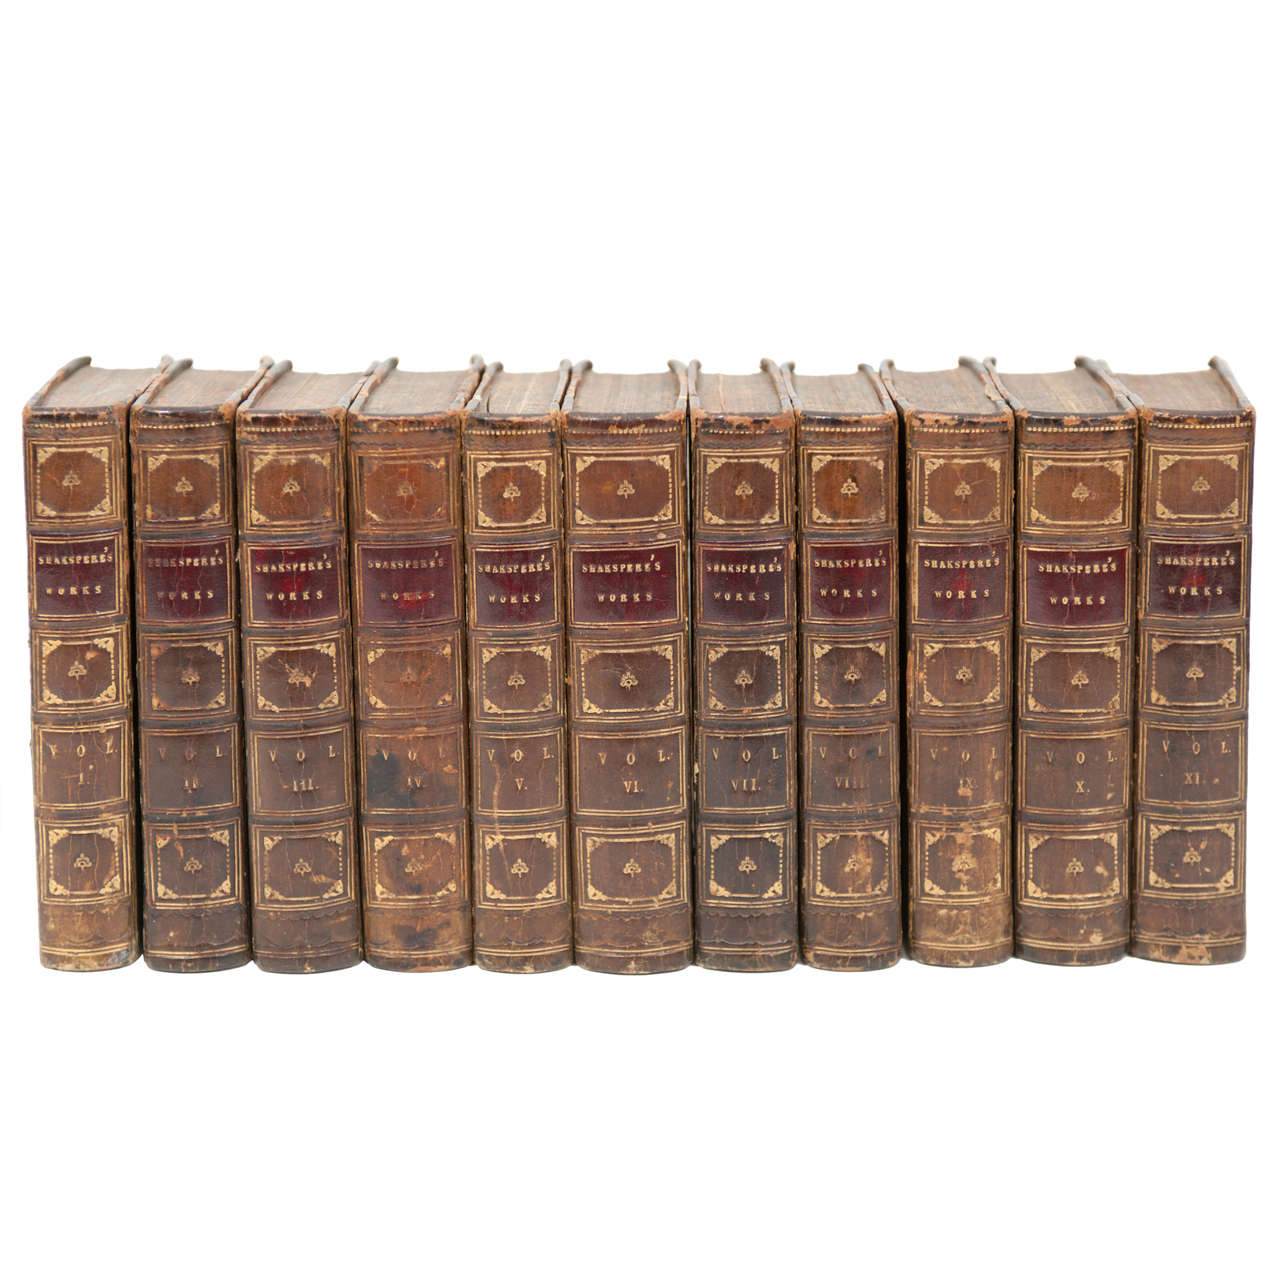 Leather-bound set of William Shakespeare’s complete works, 1843